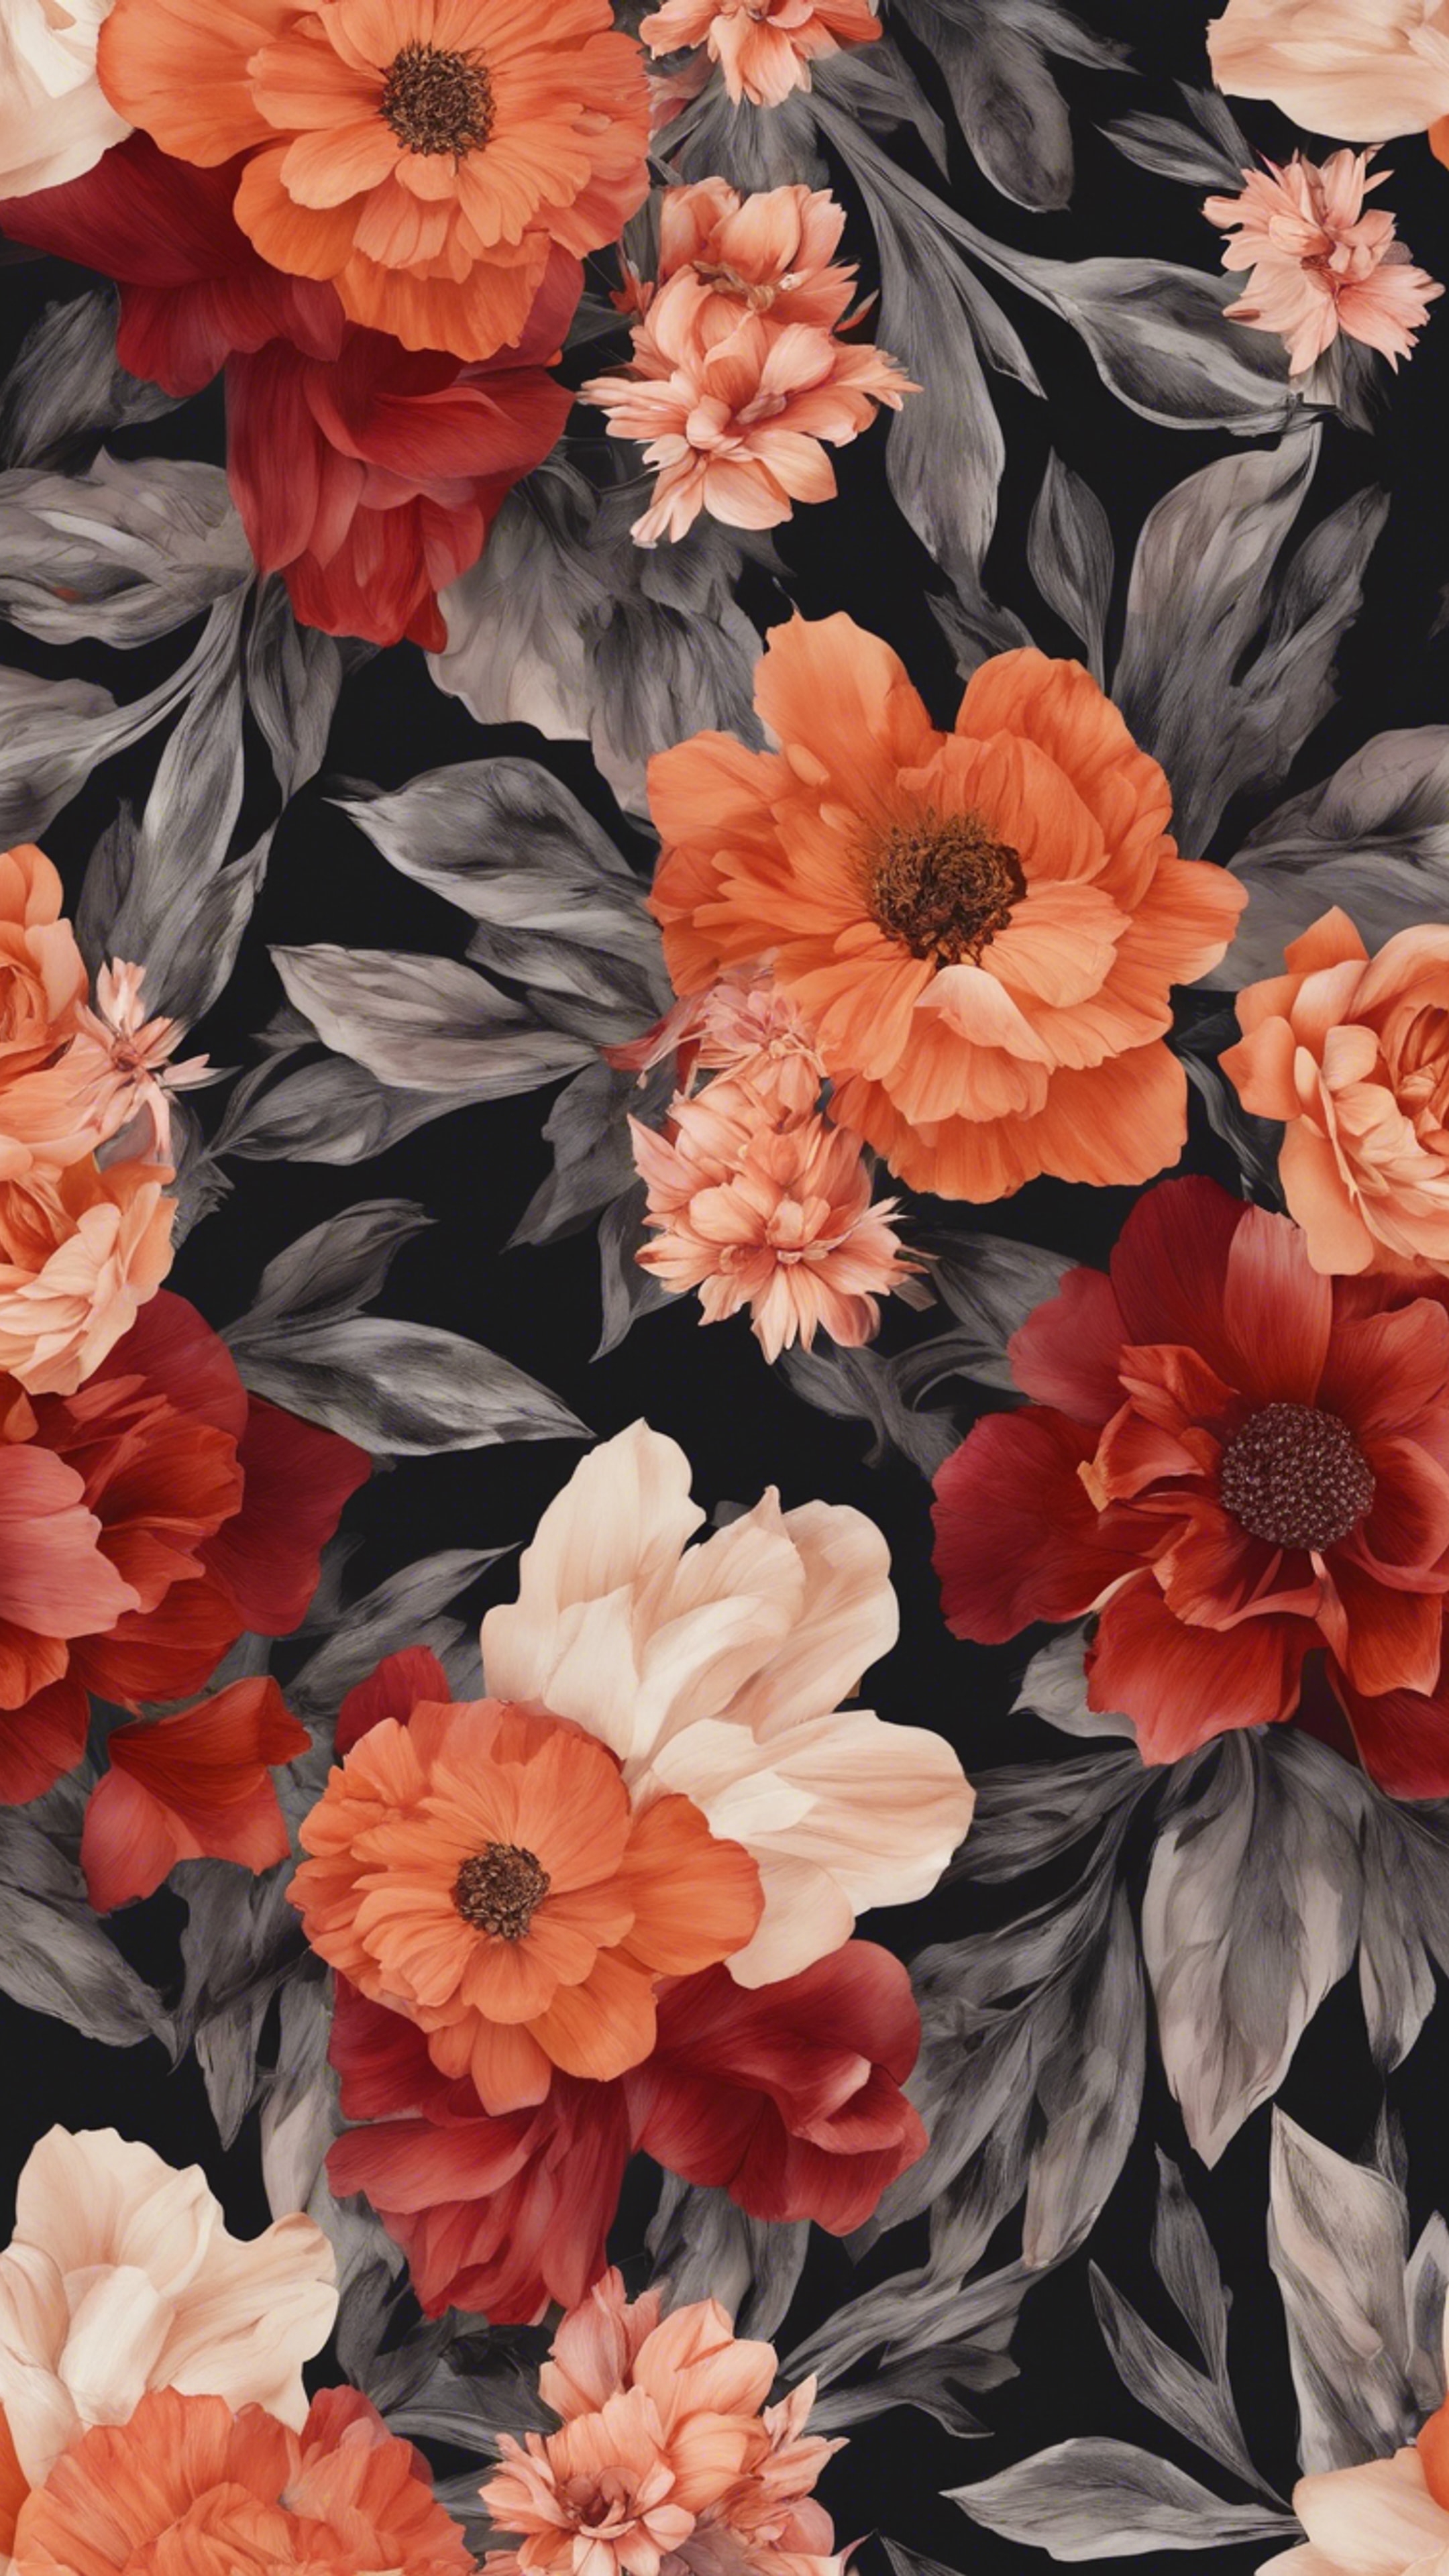 Seamless floral pattern with red and orange flowers that have a gradient effect. ផ្ទាំង​រូបភាព[2b8b1301f068420e9b5a]